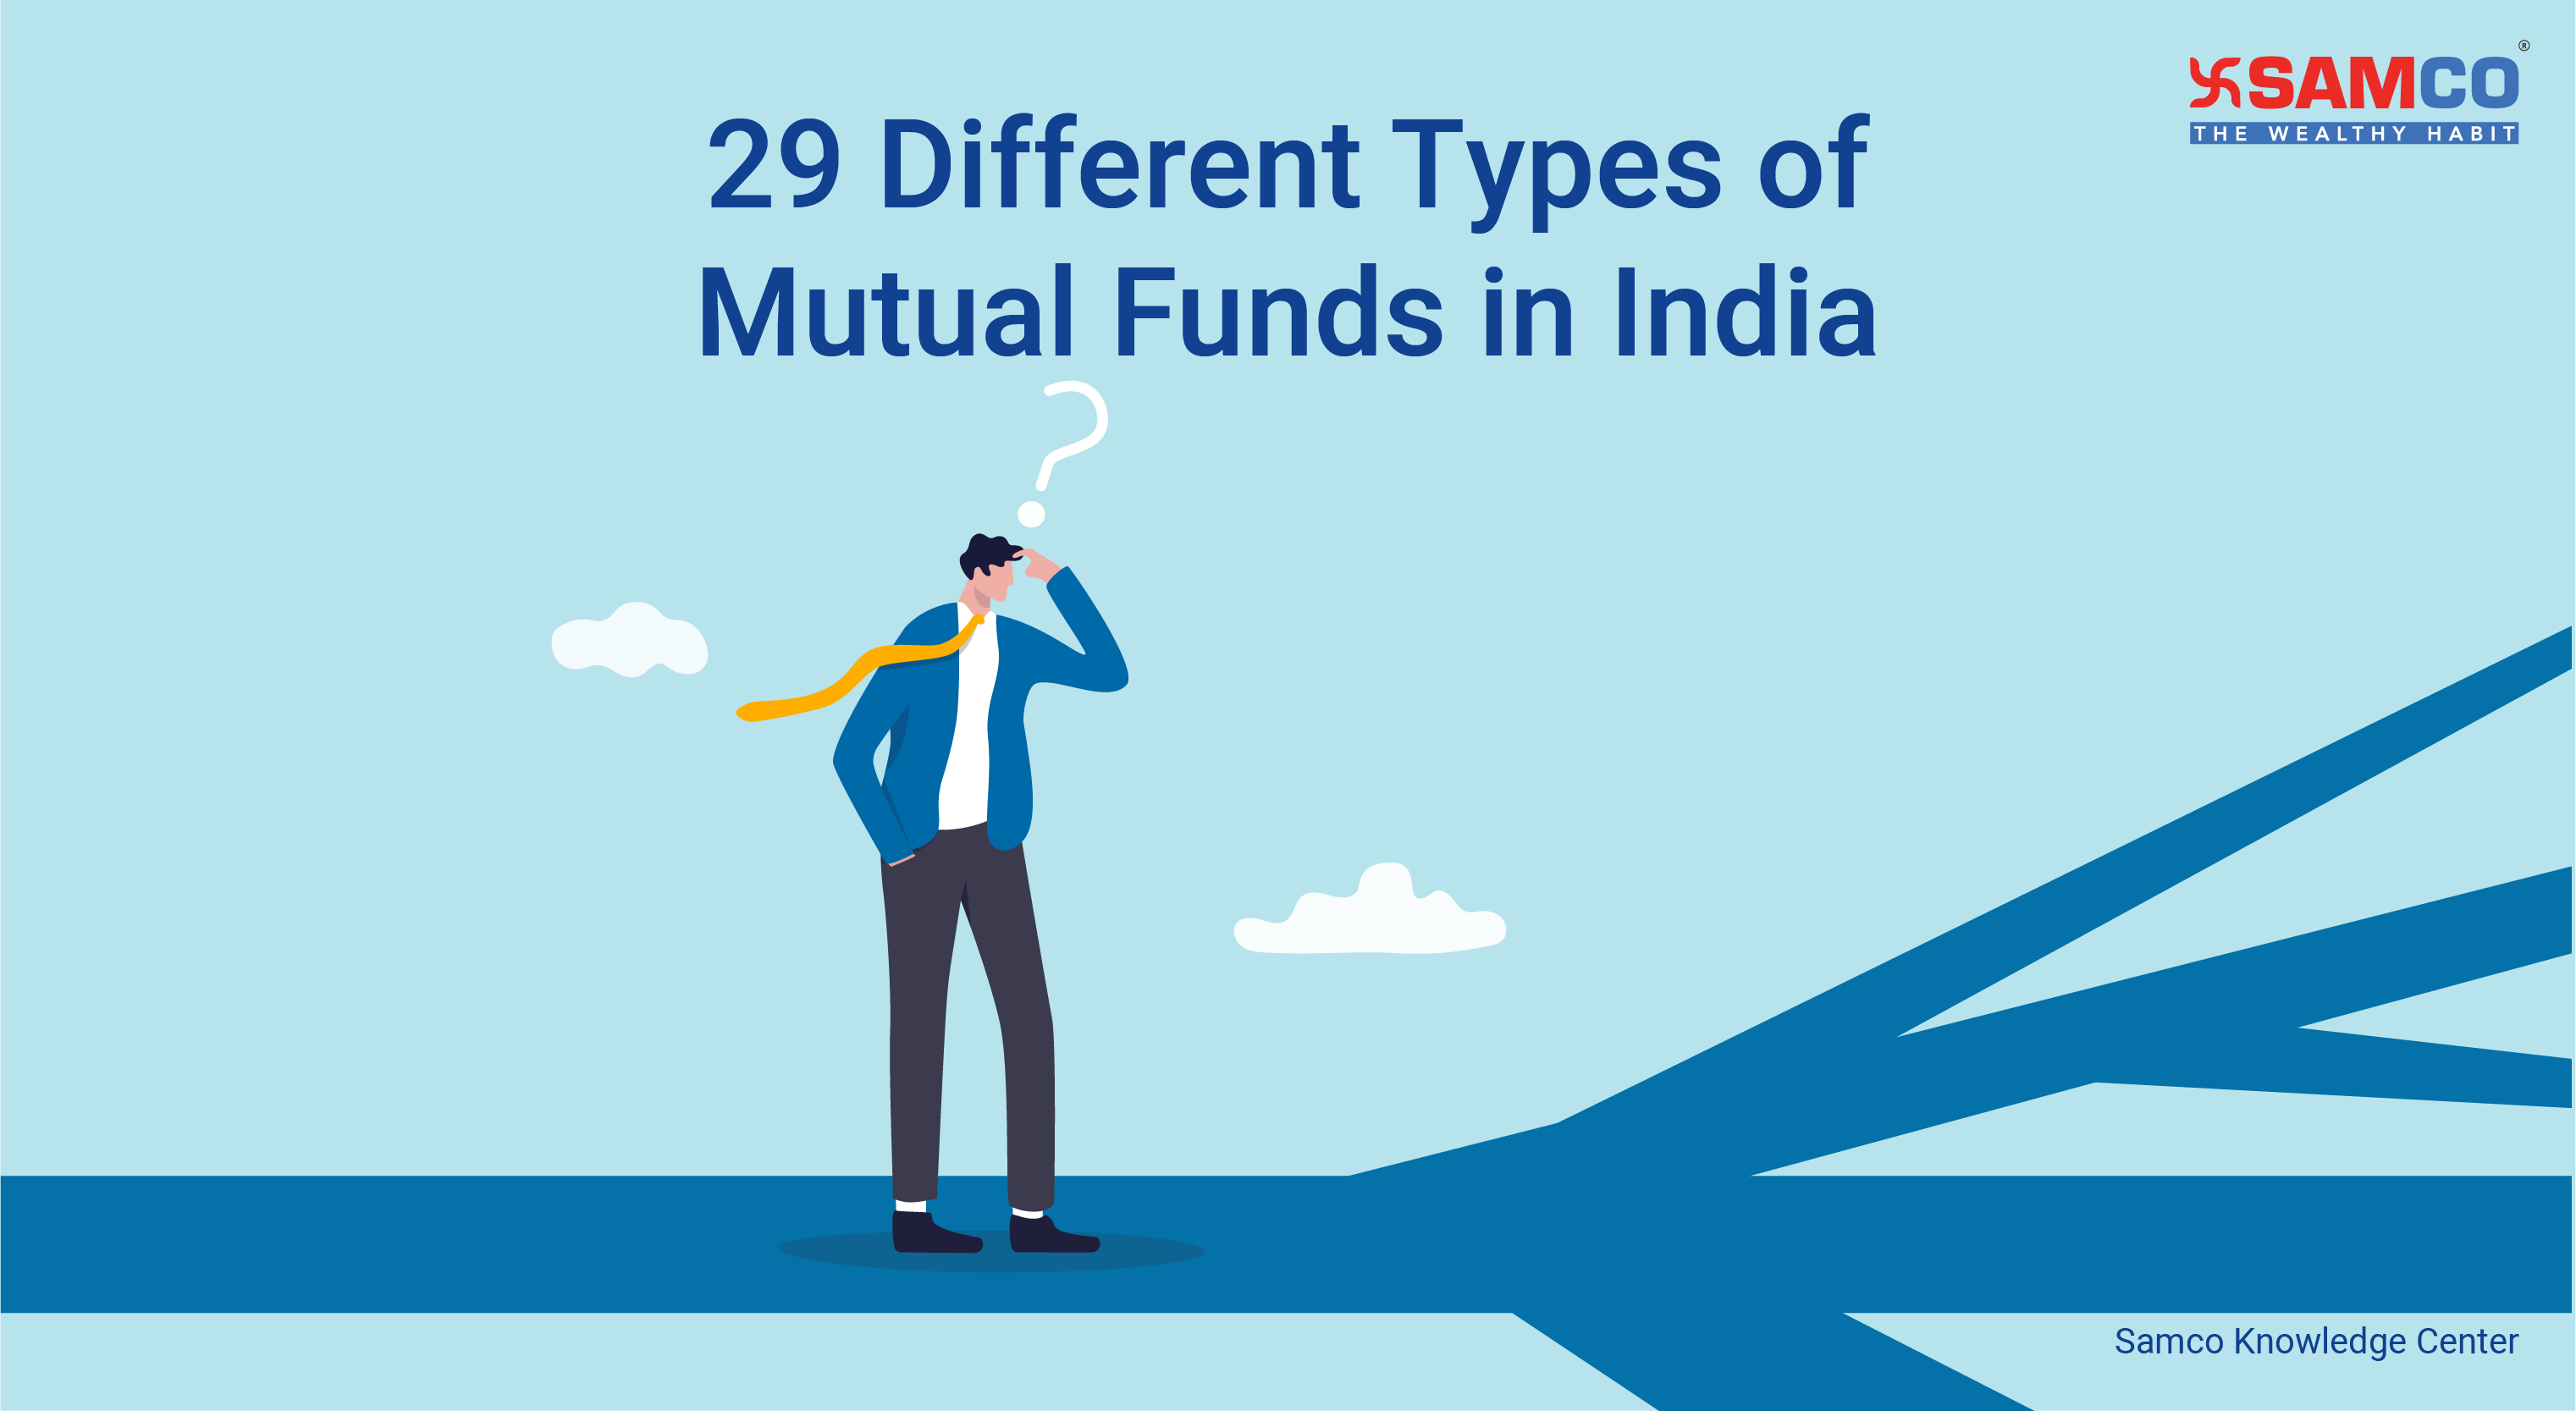 29 Different Types of Mutual Funds in India